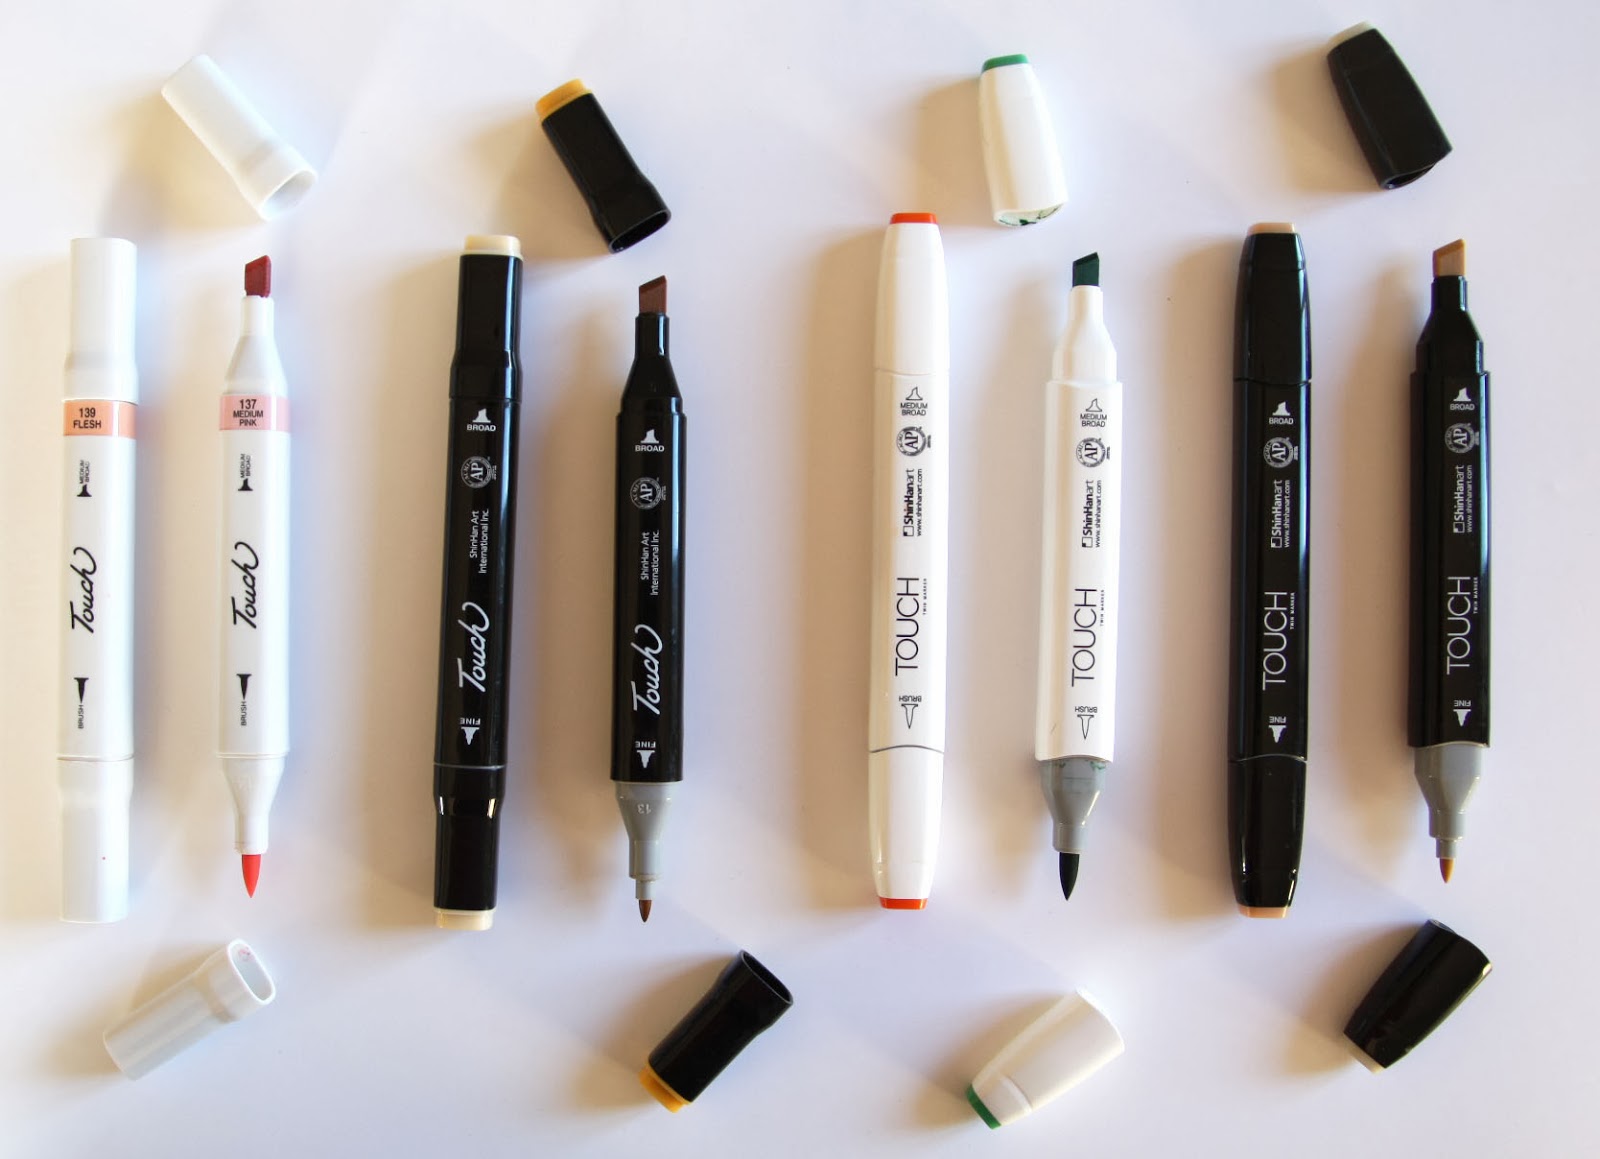 Karin Markers - Juicy markers for a great, colorful piece created